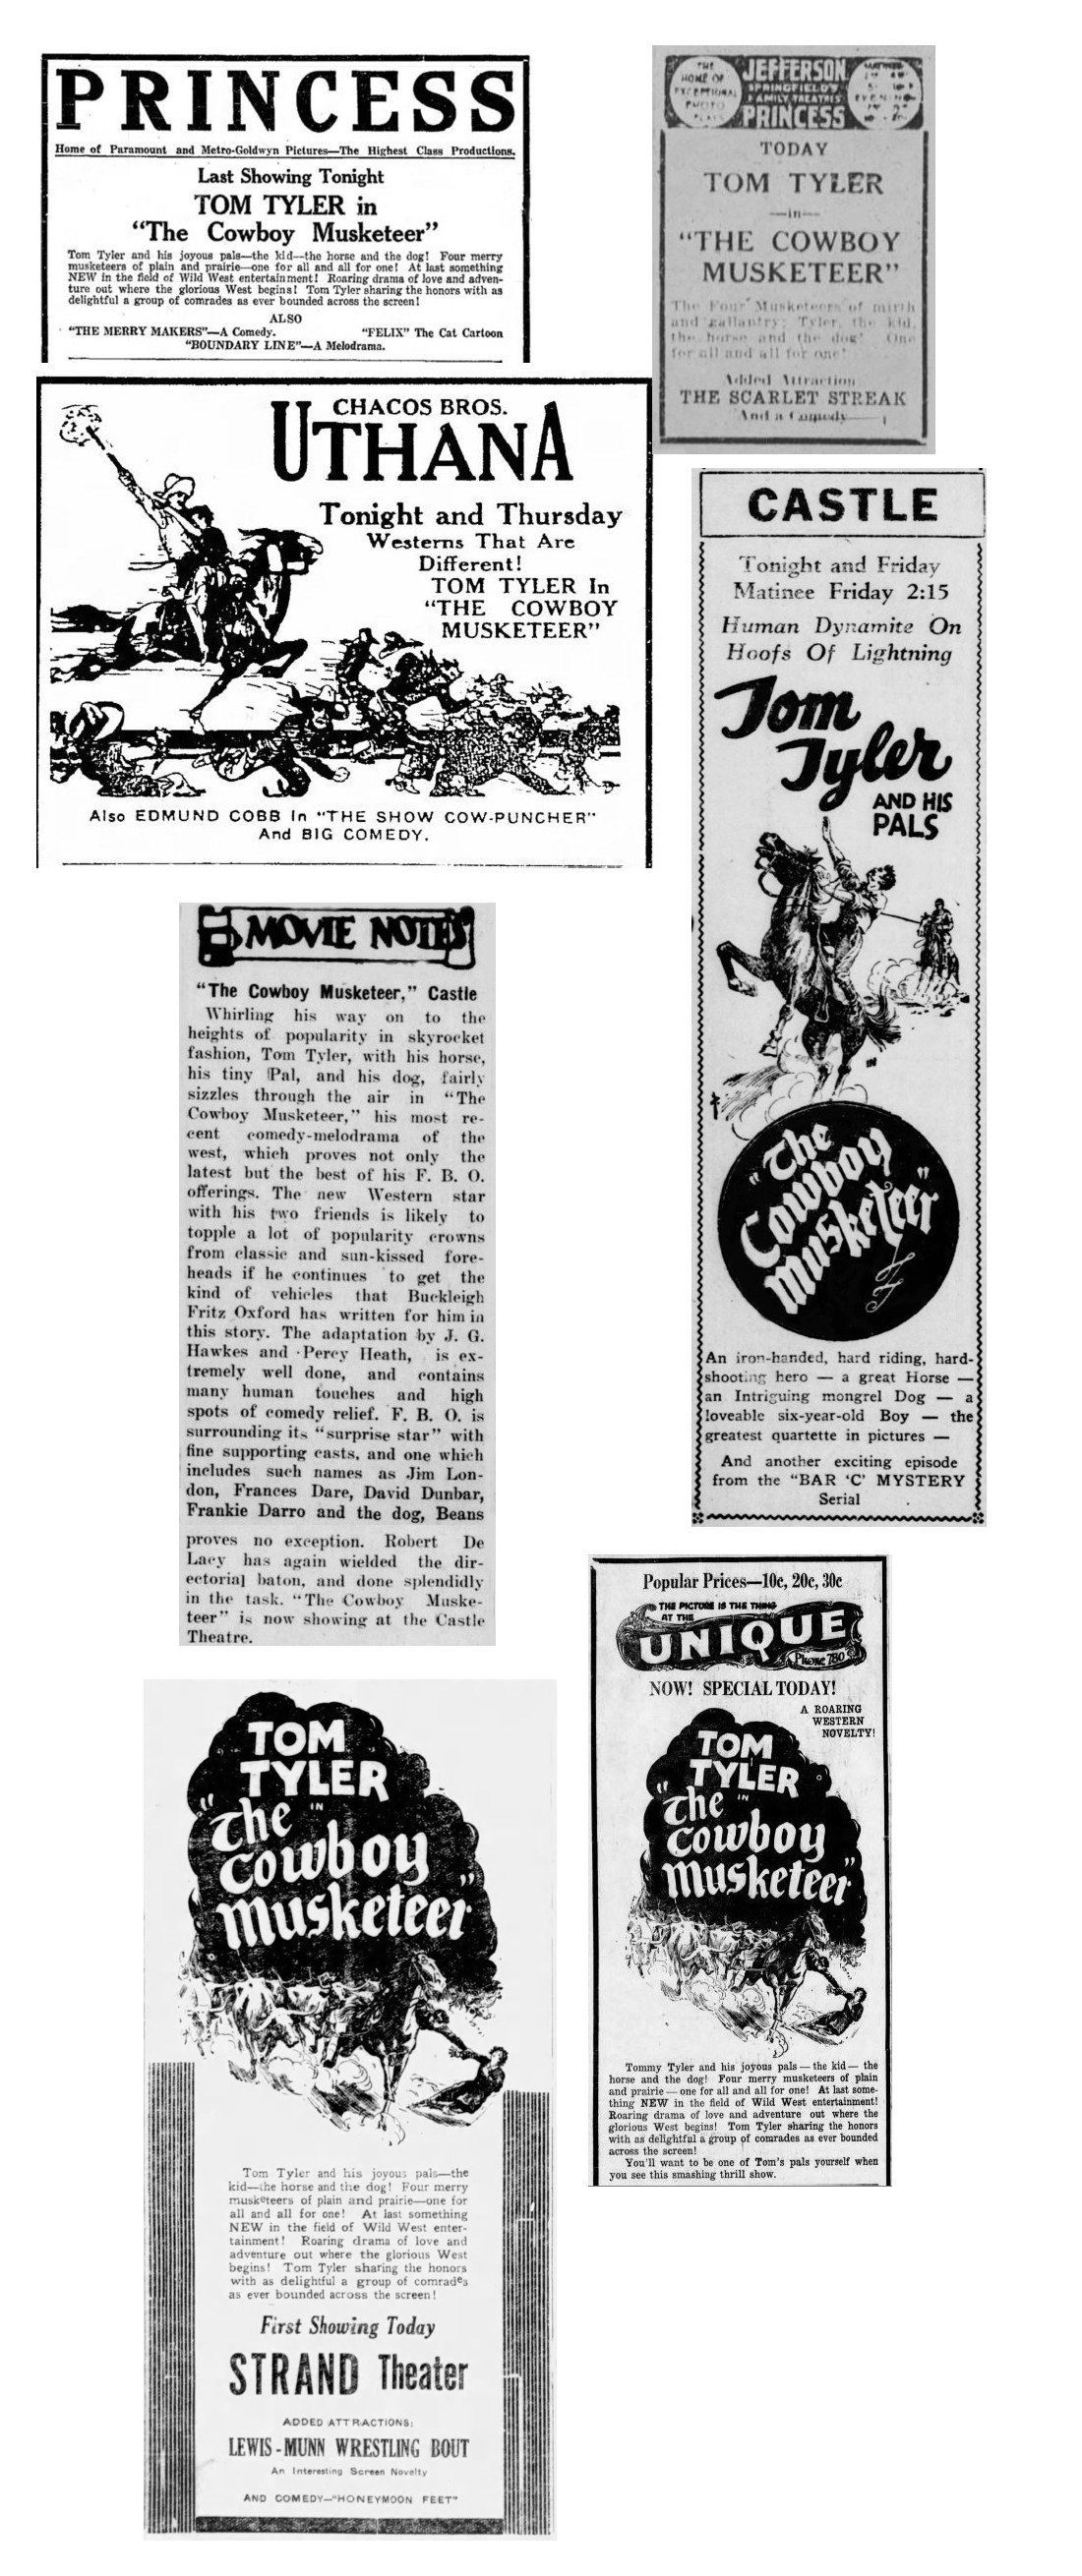 The Cowboy Musketeer cinema ads and film reviews